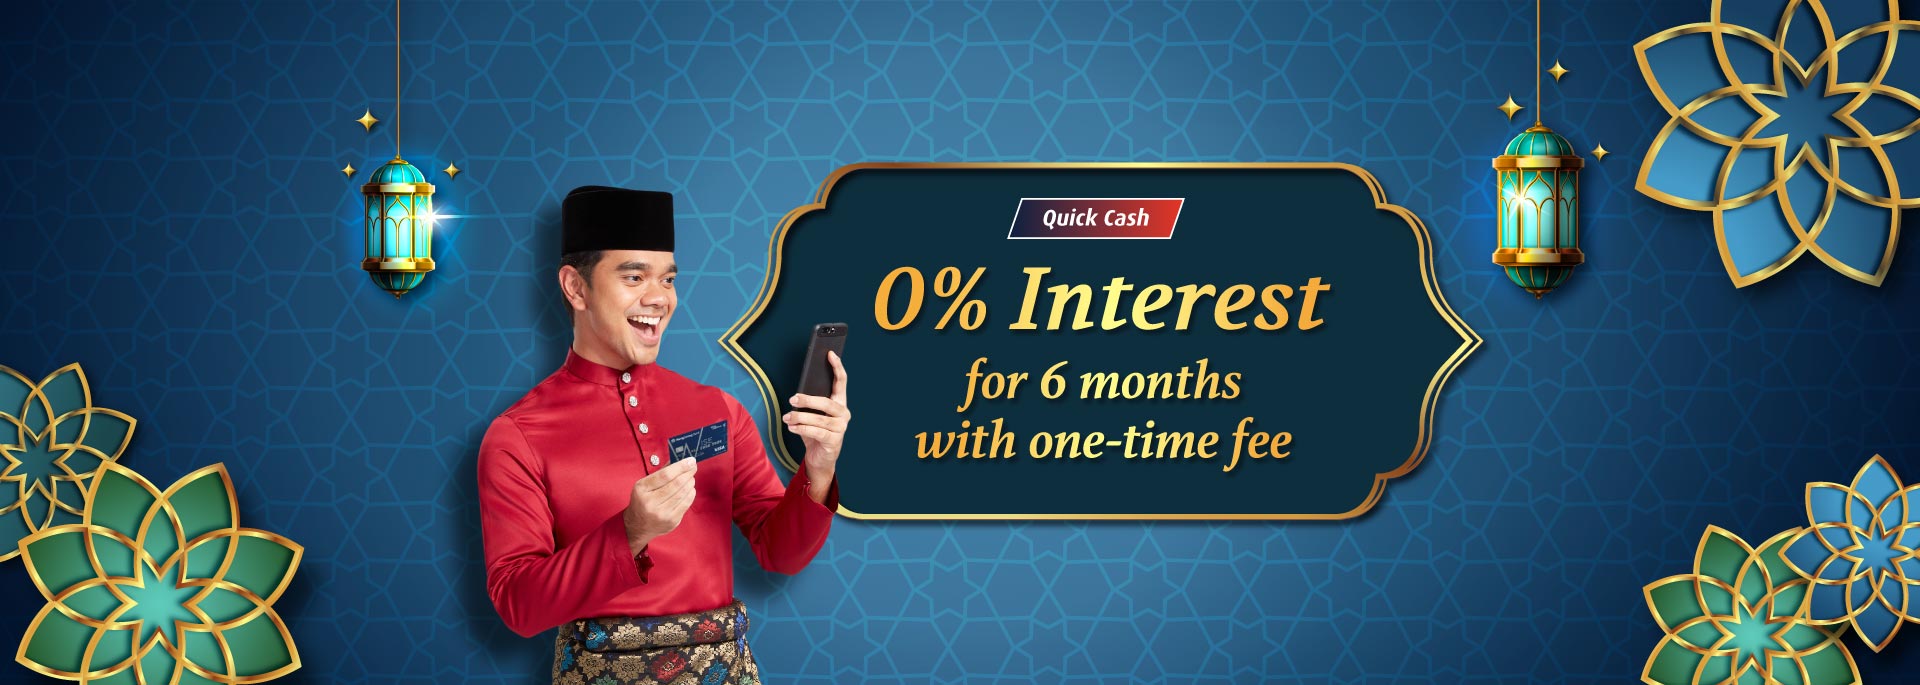 Quick Cash 0% Interest for 6 months with one-time fee